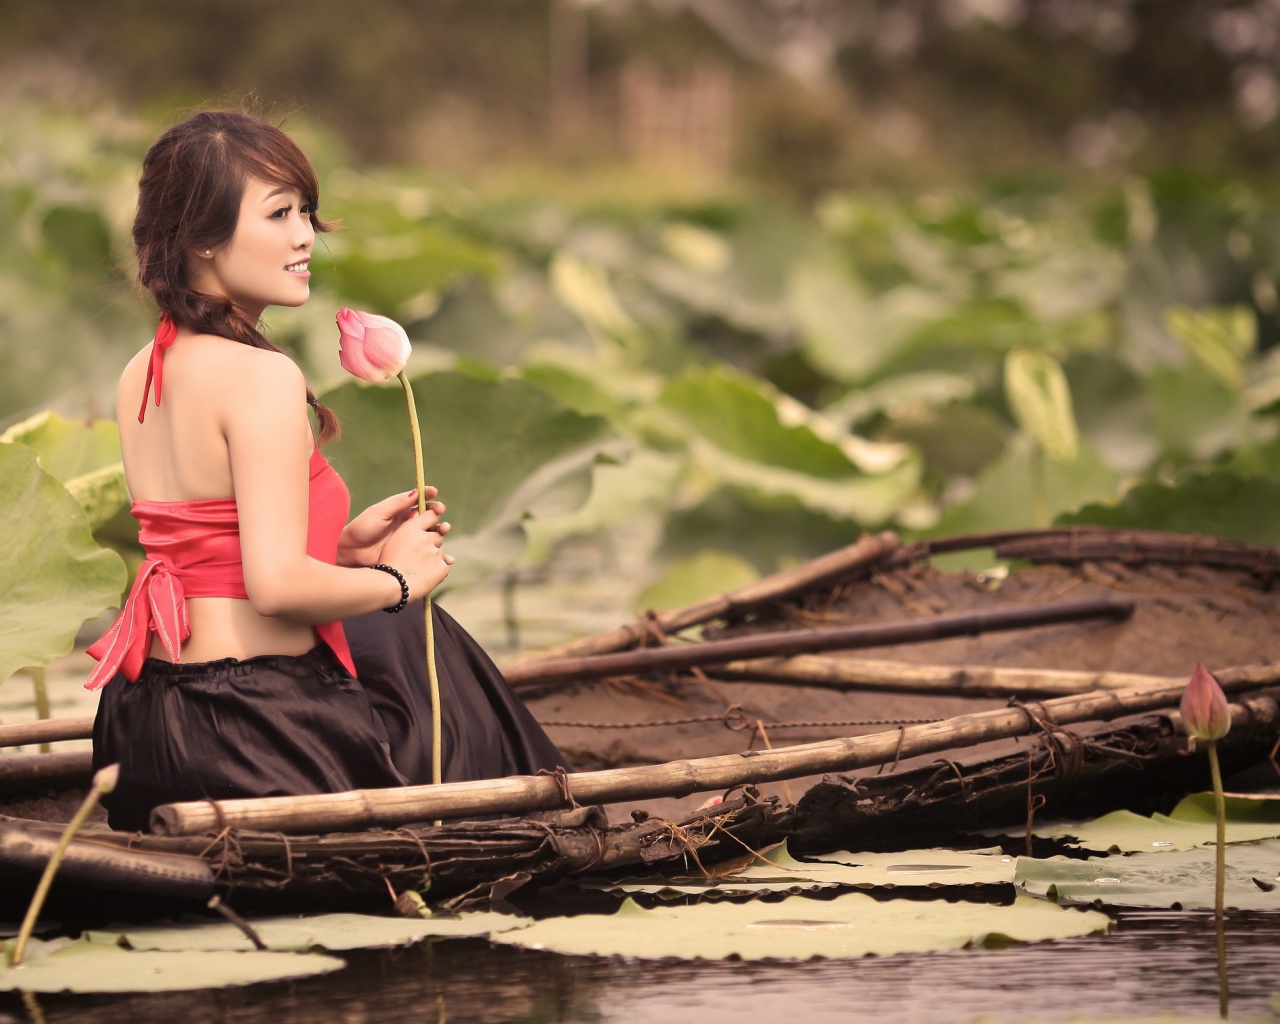 Girl with flower sitting in a boat